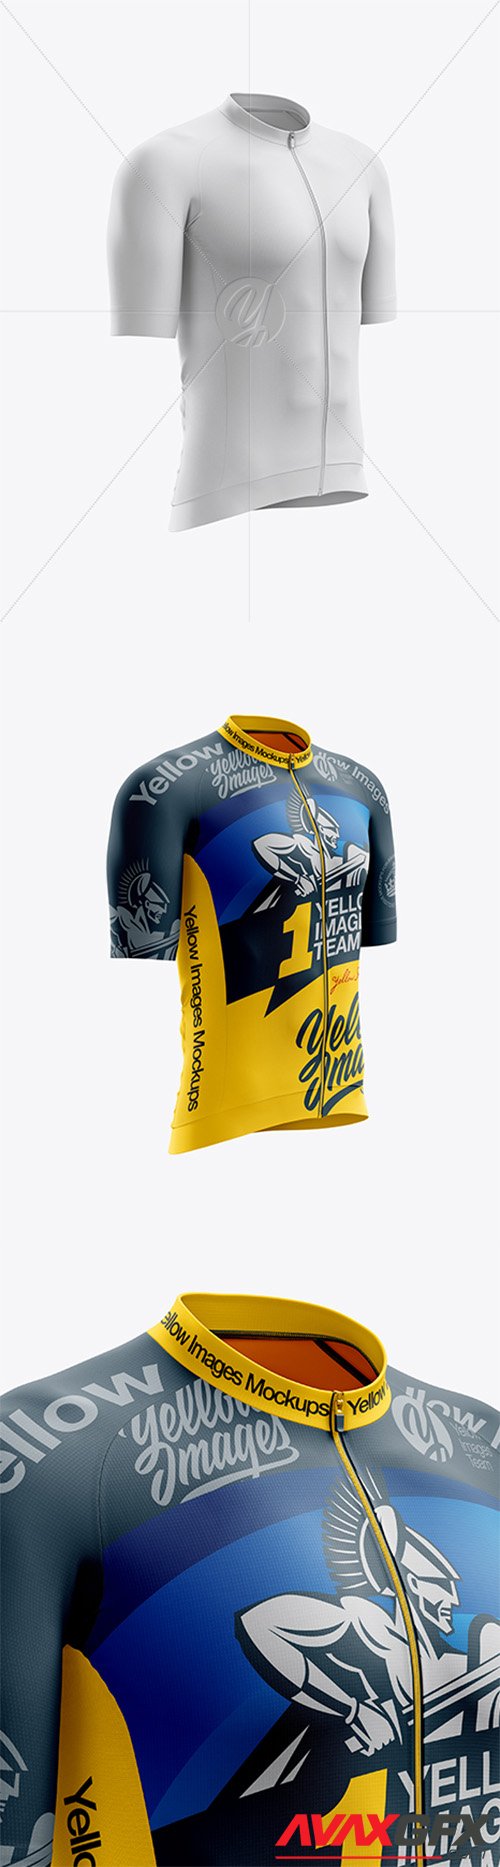 Download Men S Cycling Speed Jersey Mockup Right Half Side View 24924 Avaxgfx All Downloads That You Need In One Place Graphic From Nitroflare Rapidgator